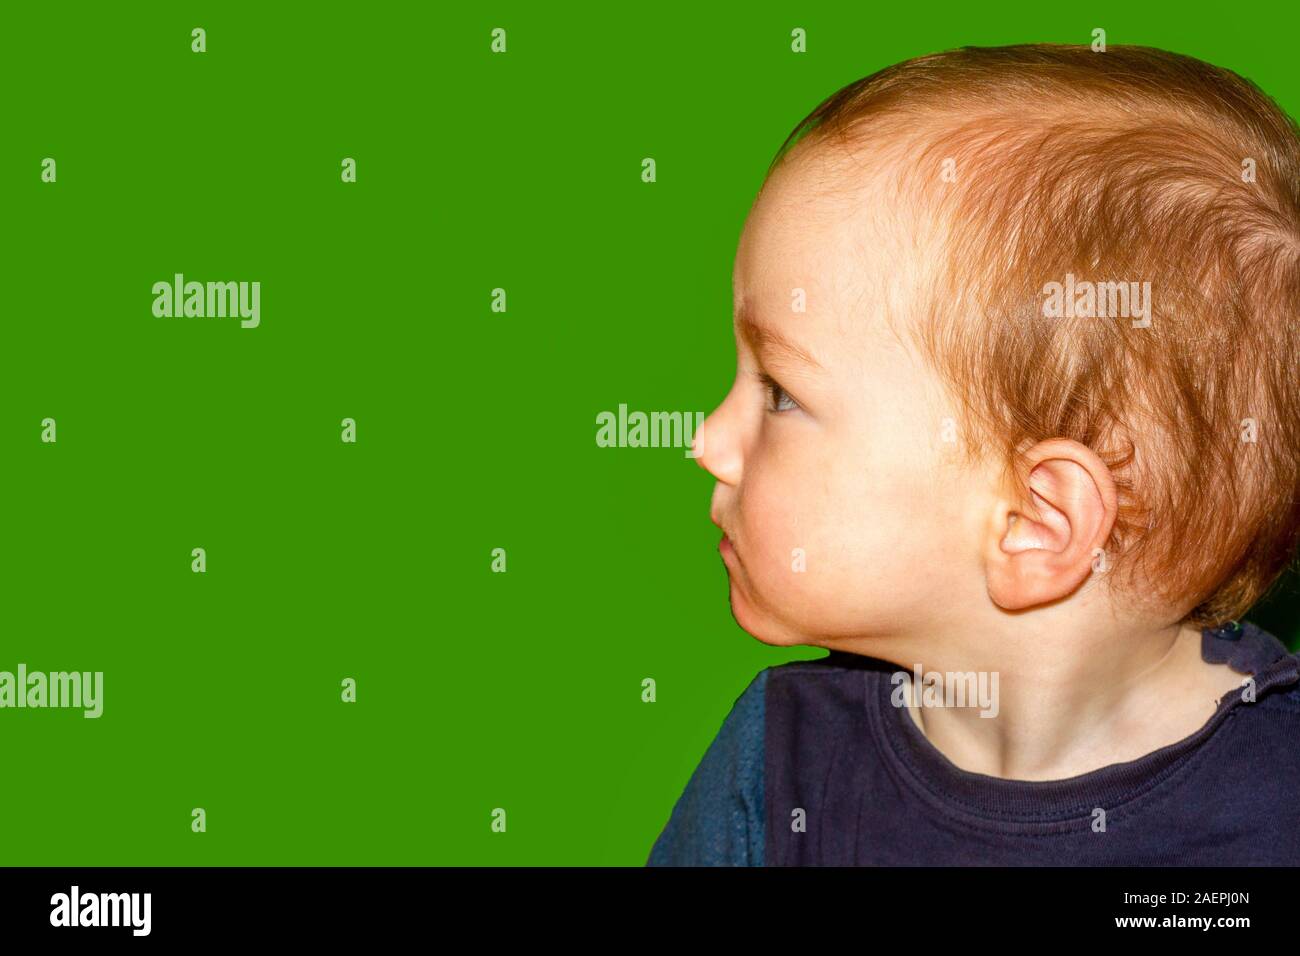 Little boy staring critically to the side seen in profile in front of a green background Stock Photo